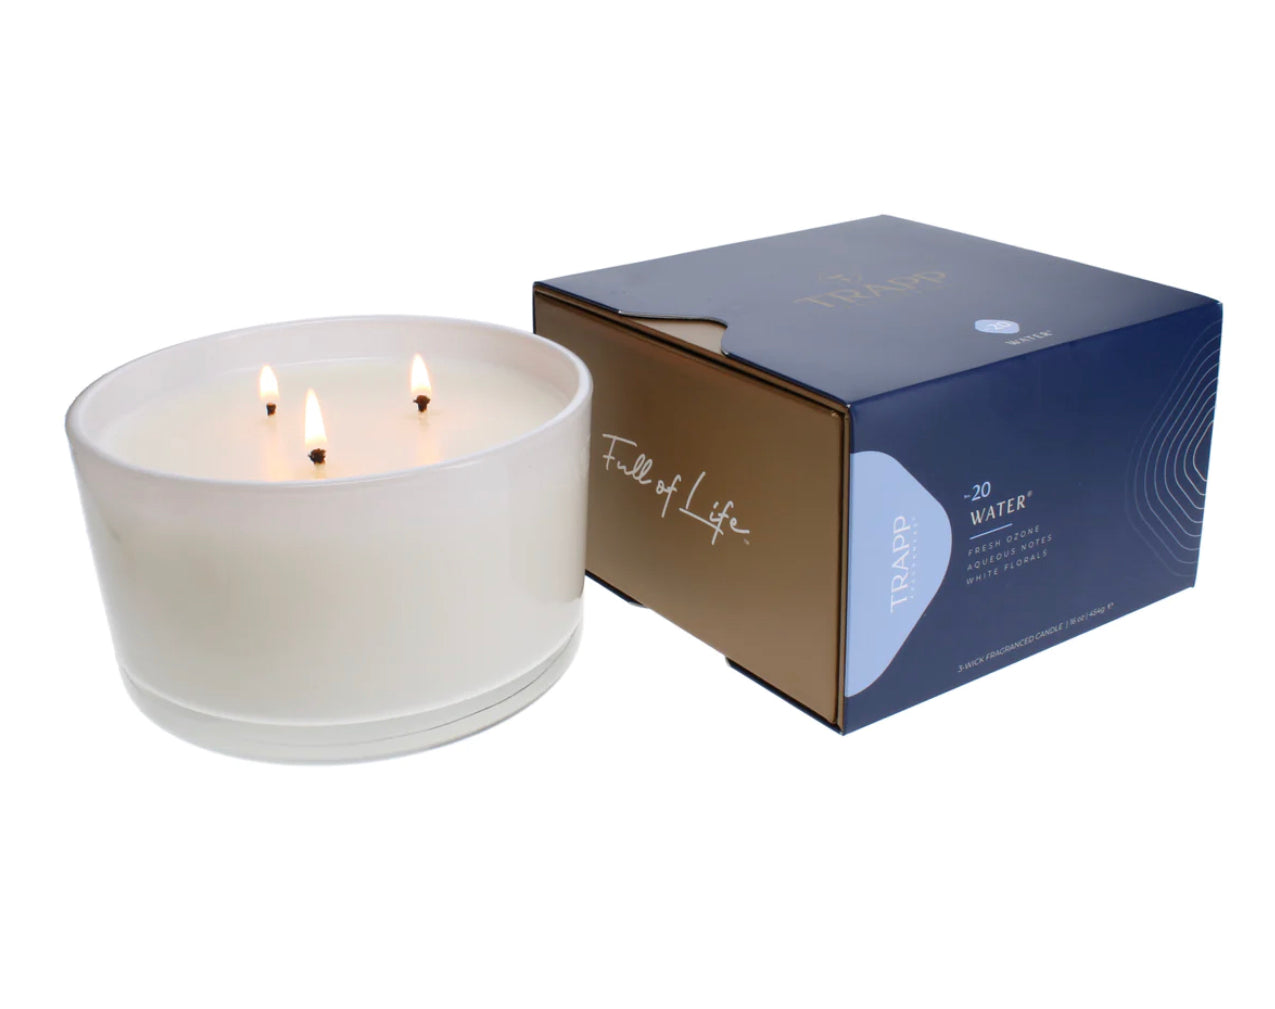 No. 20 Water® 16 oz. 3-Wick Candle